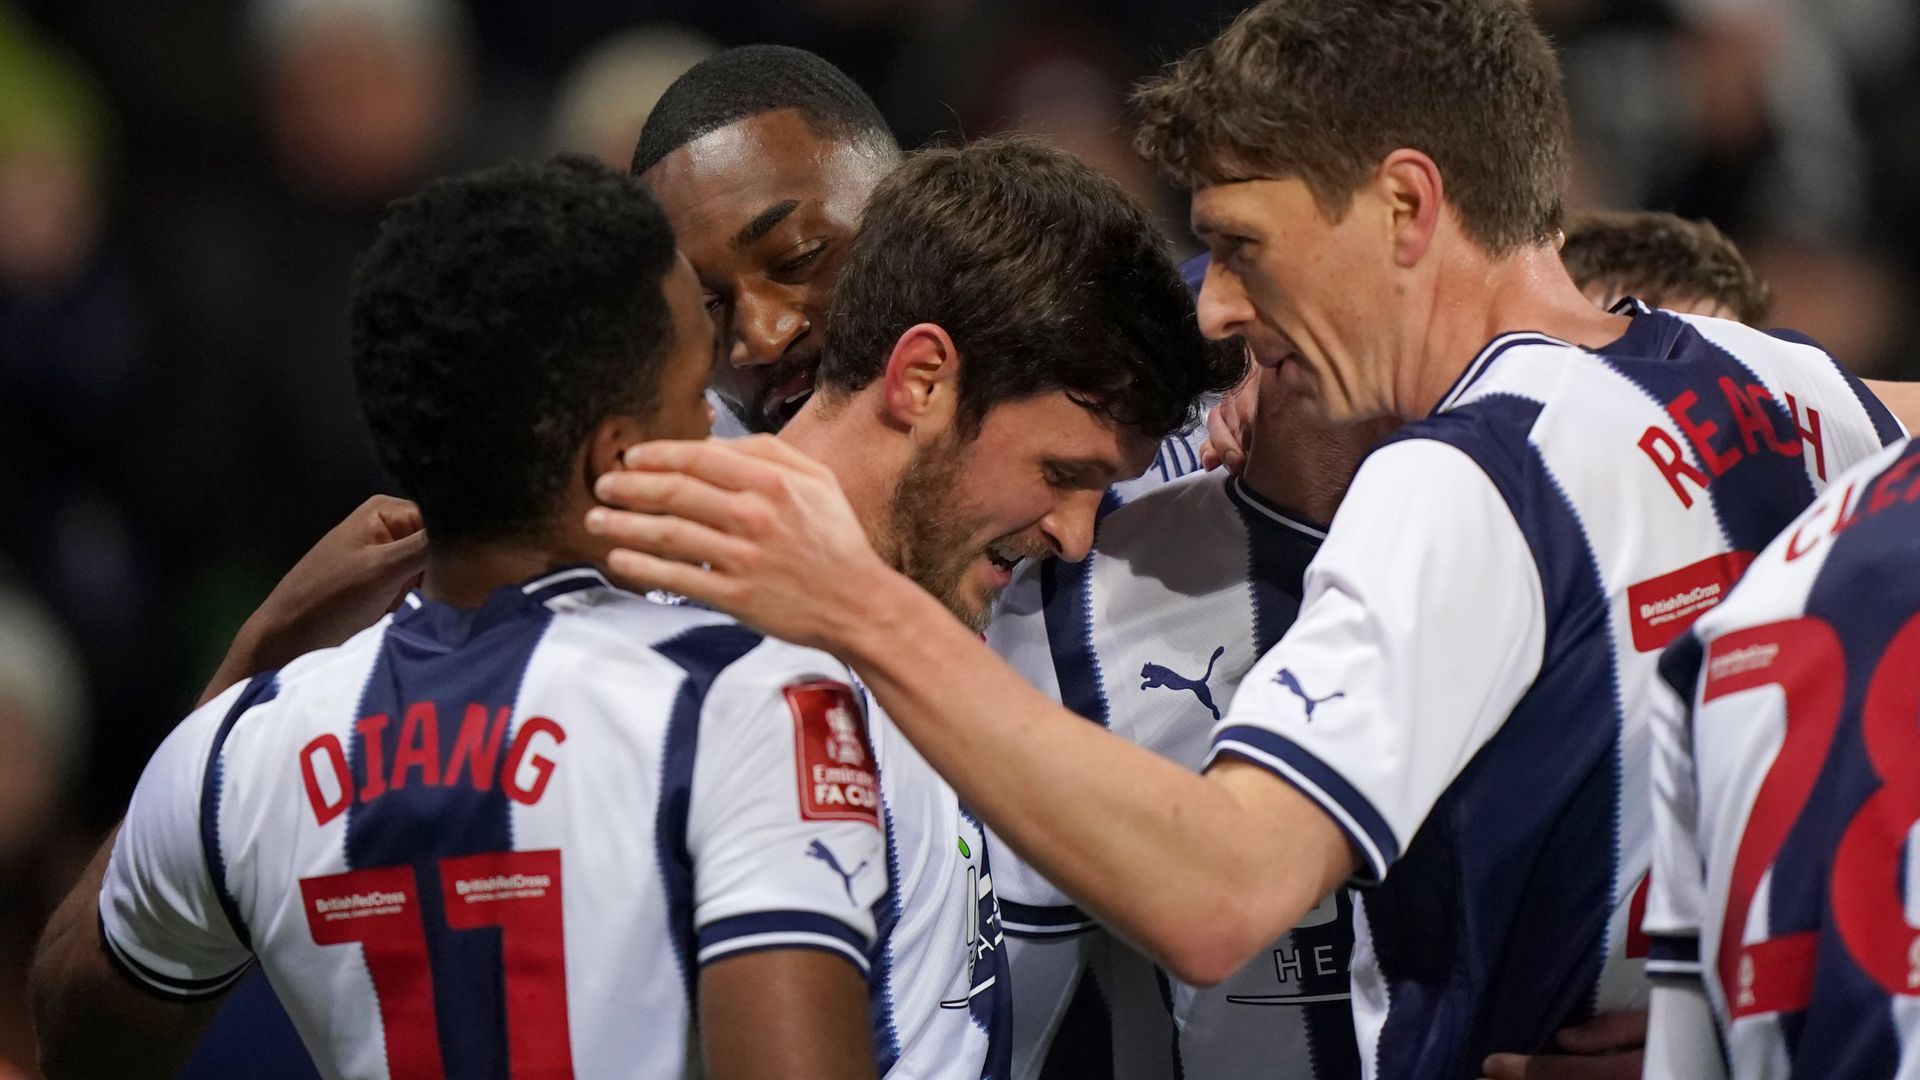 FA Cup round-up: West Brom thrash non-League Chesterfield to reach fourth round